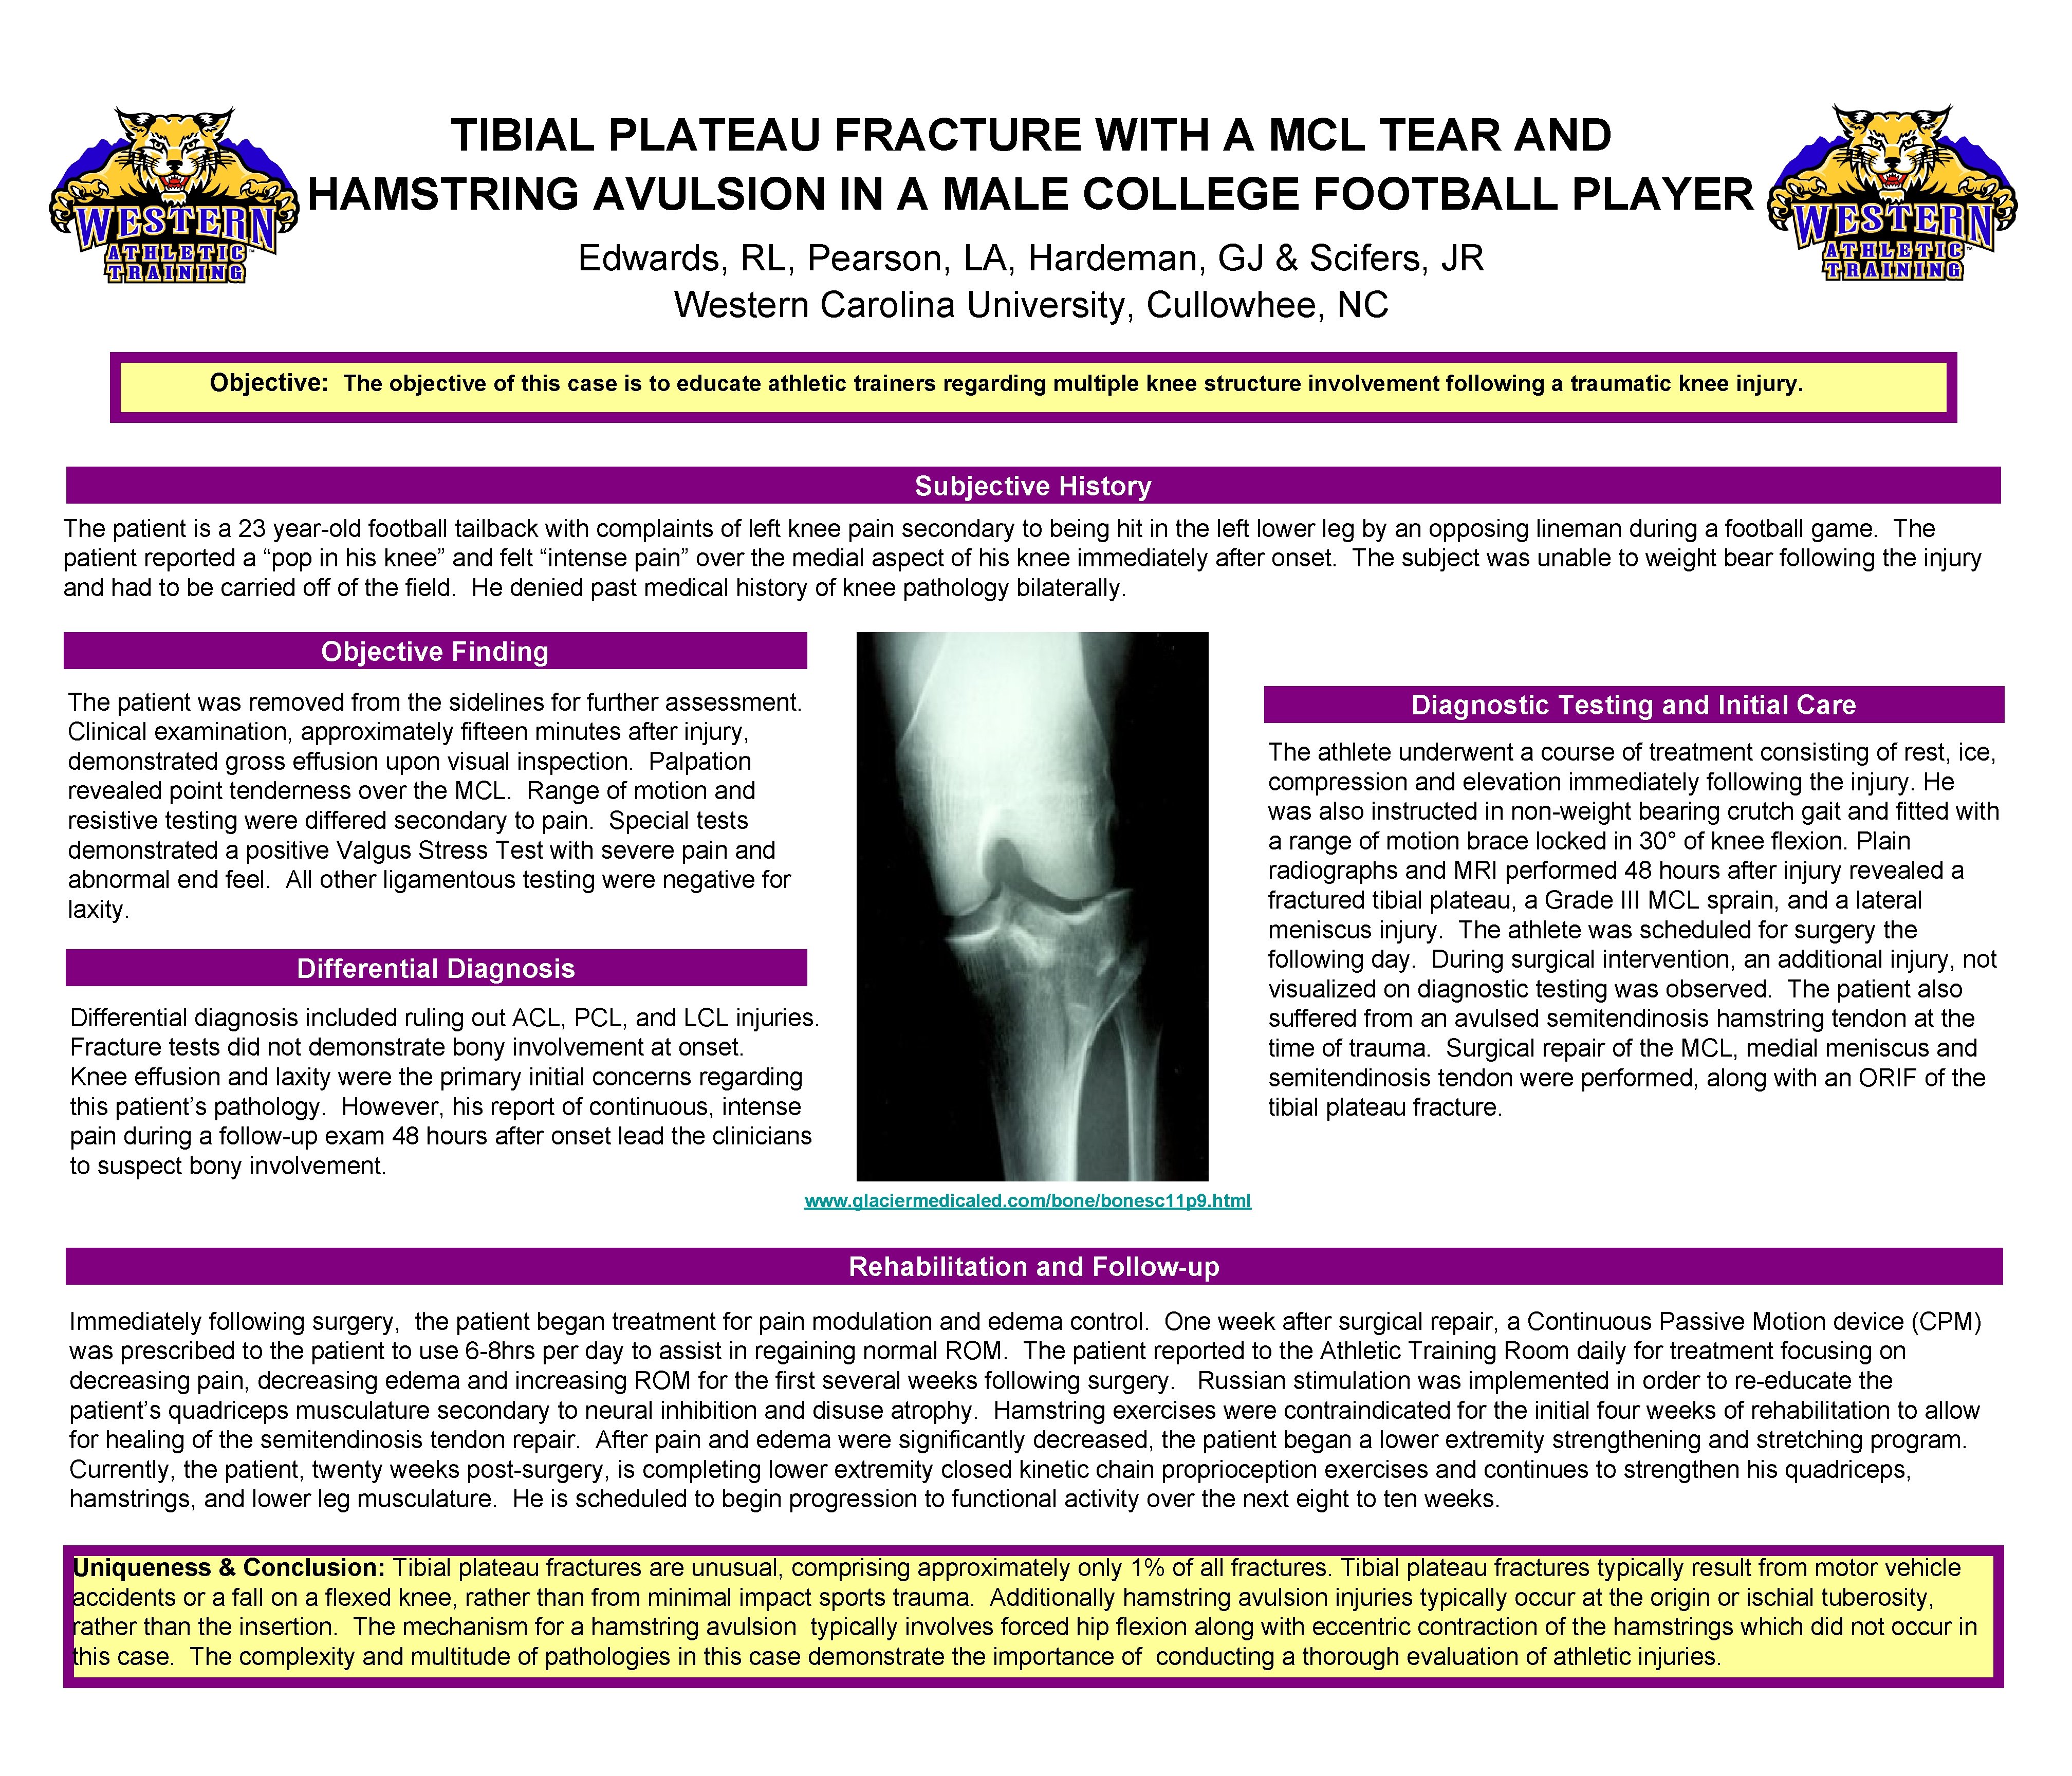 TIBIAL PLATEAU FRACTURE WITH A MCL TEAR AND HAMSTRING AVULSION IN A MALE COLLEGE